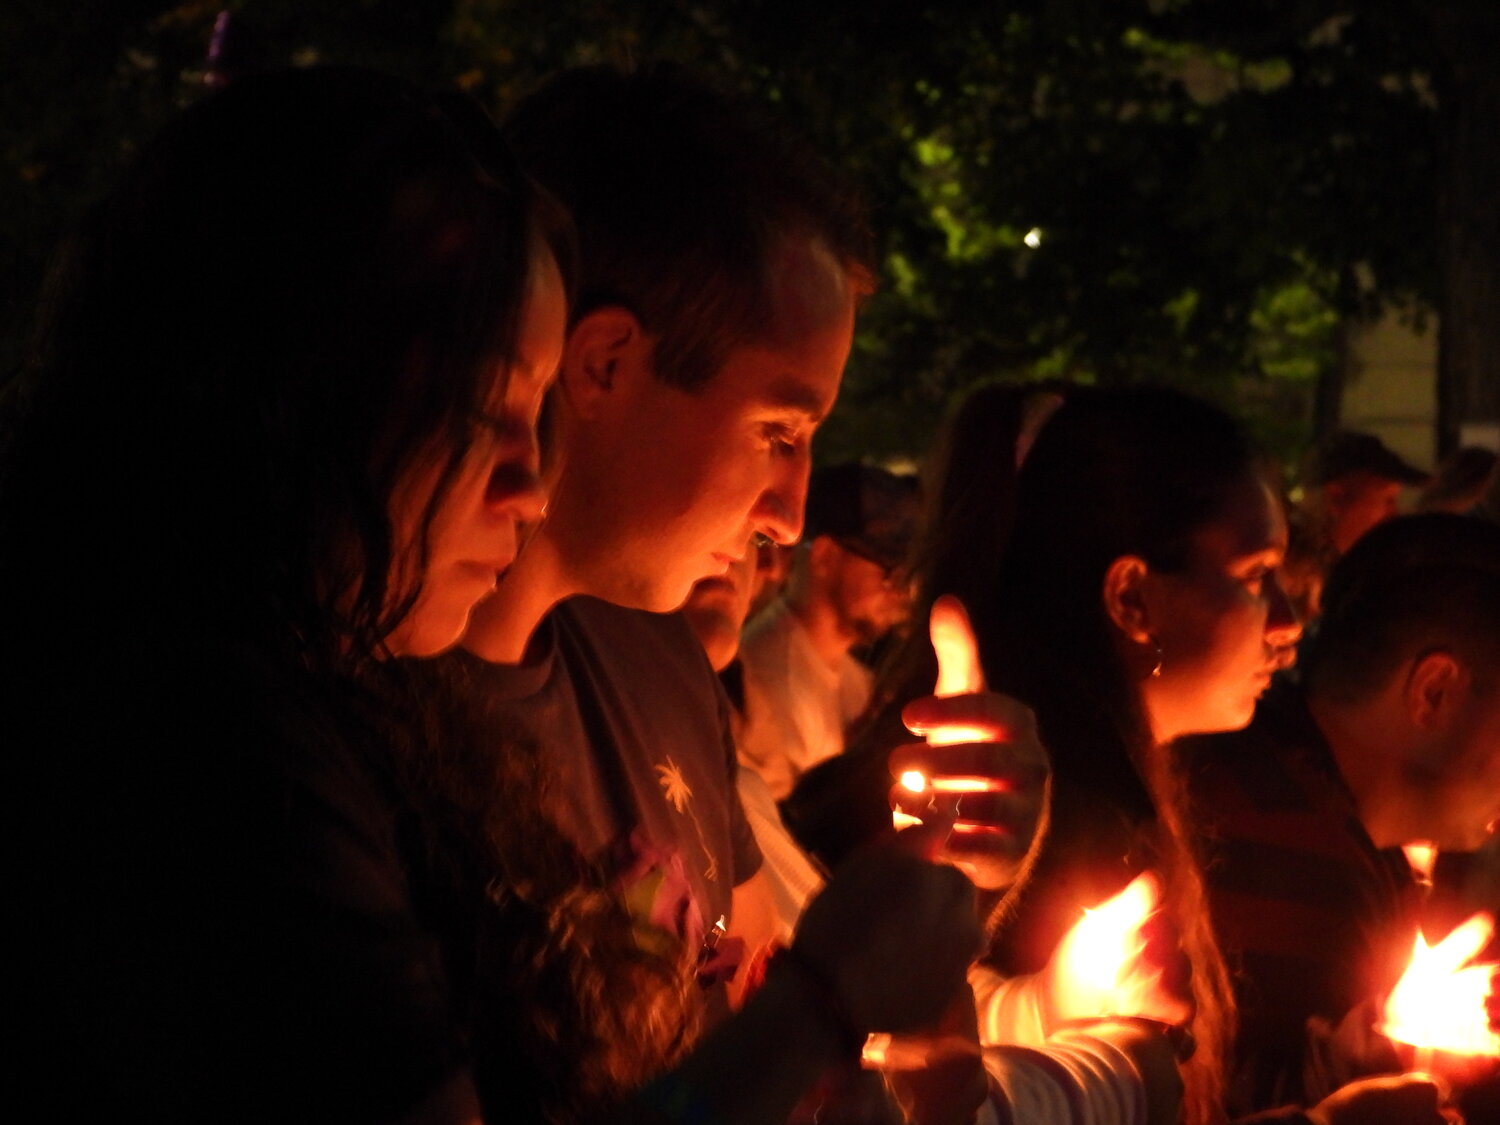 Flames were shared by neighbors and friends as candles were lit in honor and remembrance of Int’l Overdose Awareness Day.